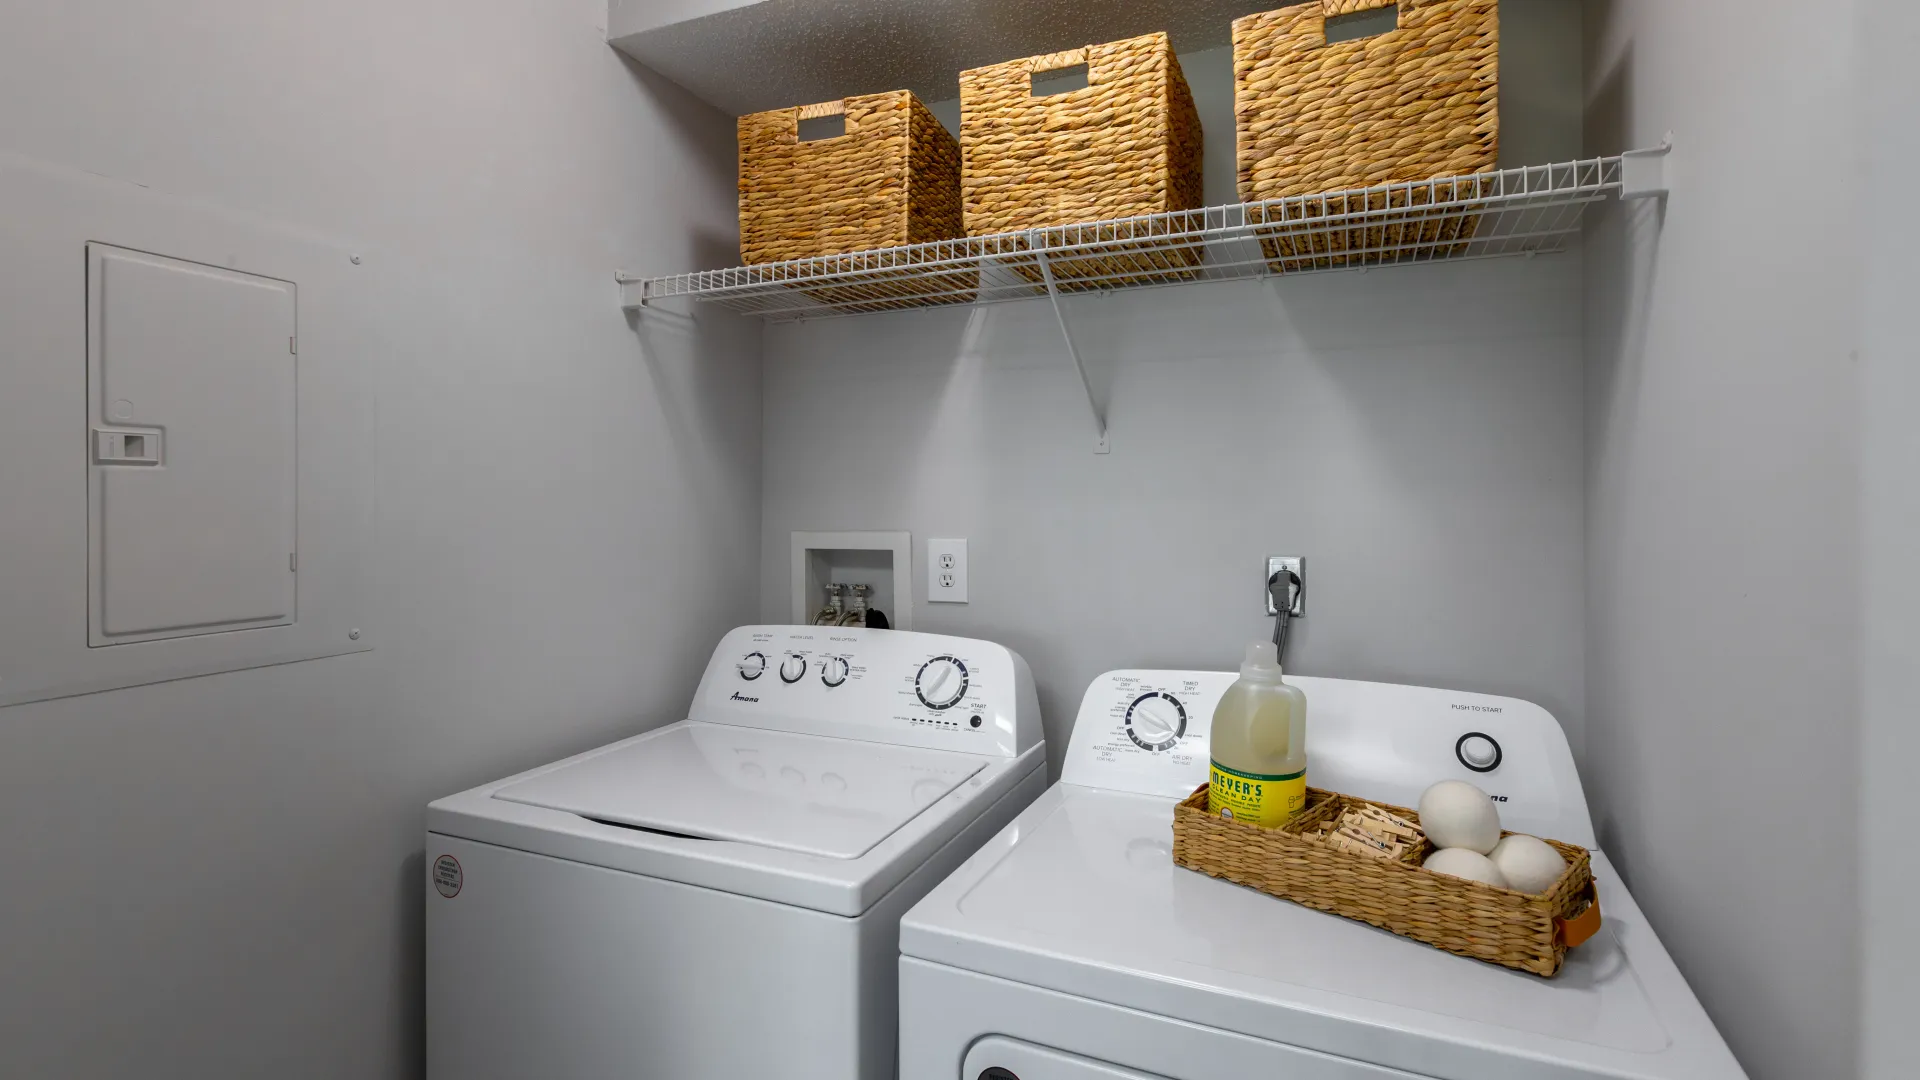 In-unit laundry room with a modern washer and dryer, wire shelving with wicker baskets for storage, and laundry essentials neatly organized.